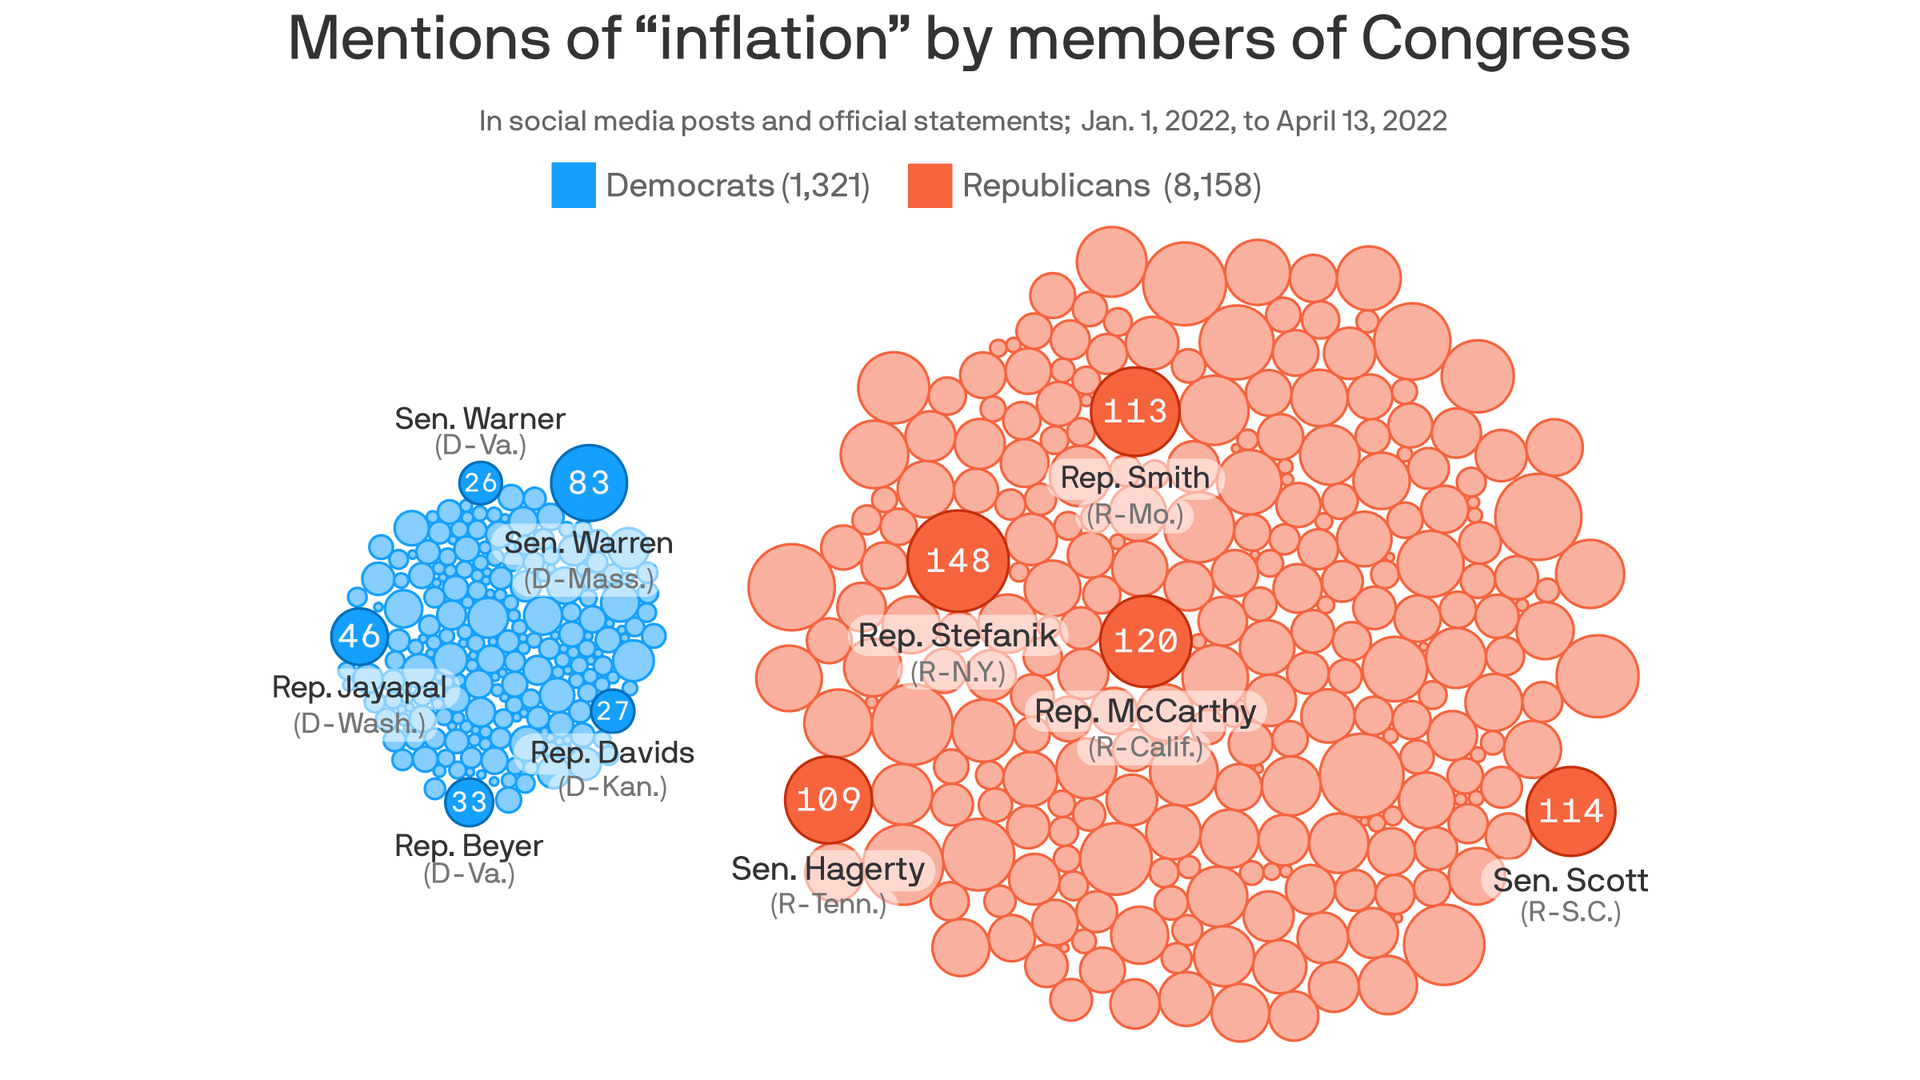 Mentions of "inflation" by members of Congress